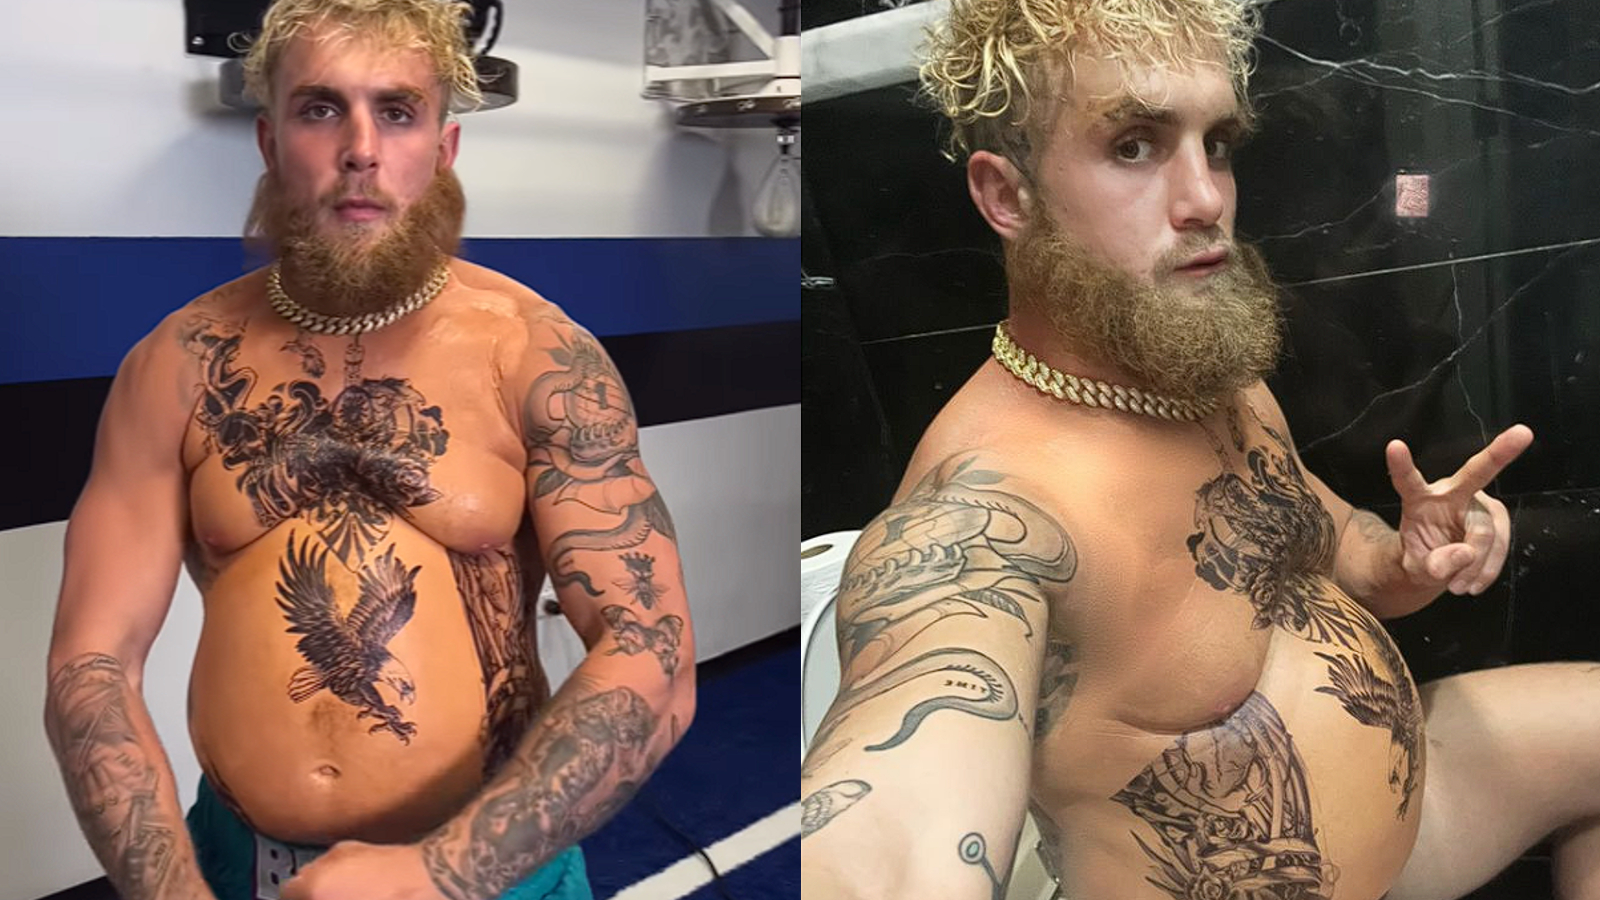 Jake Paul Dons Fat Suit To Challenge Tyson Fury To A Heavyweight Boxing